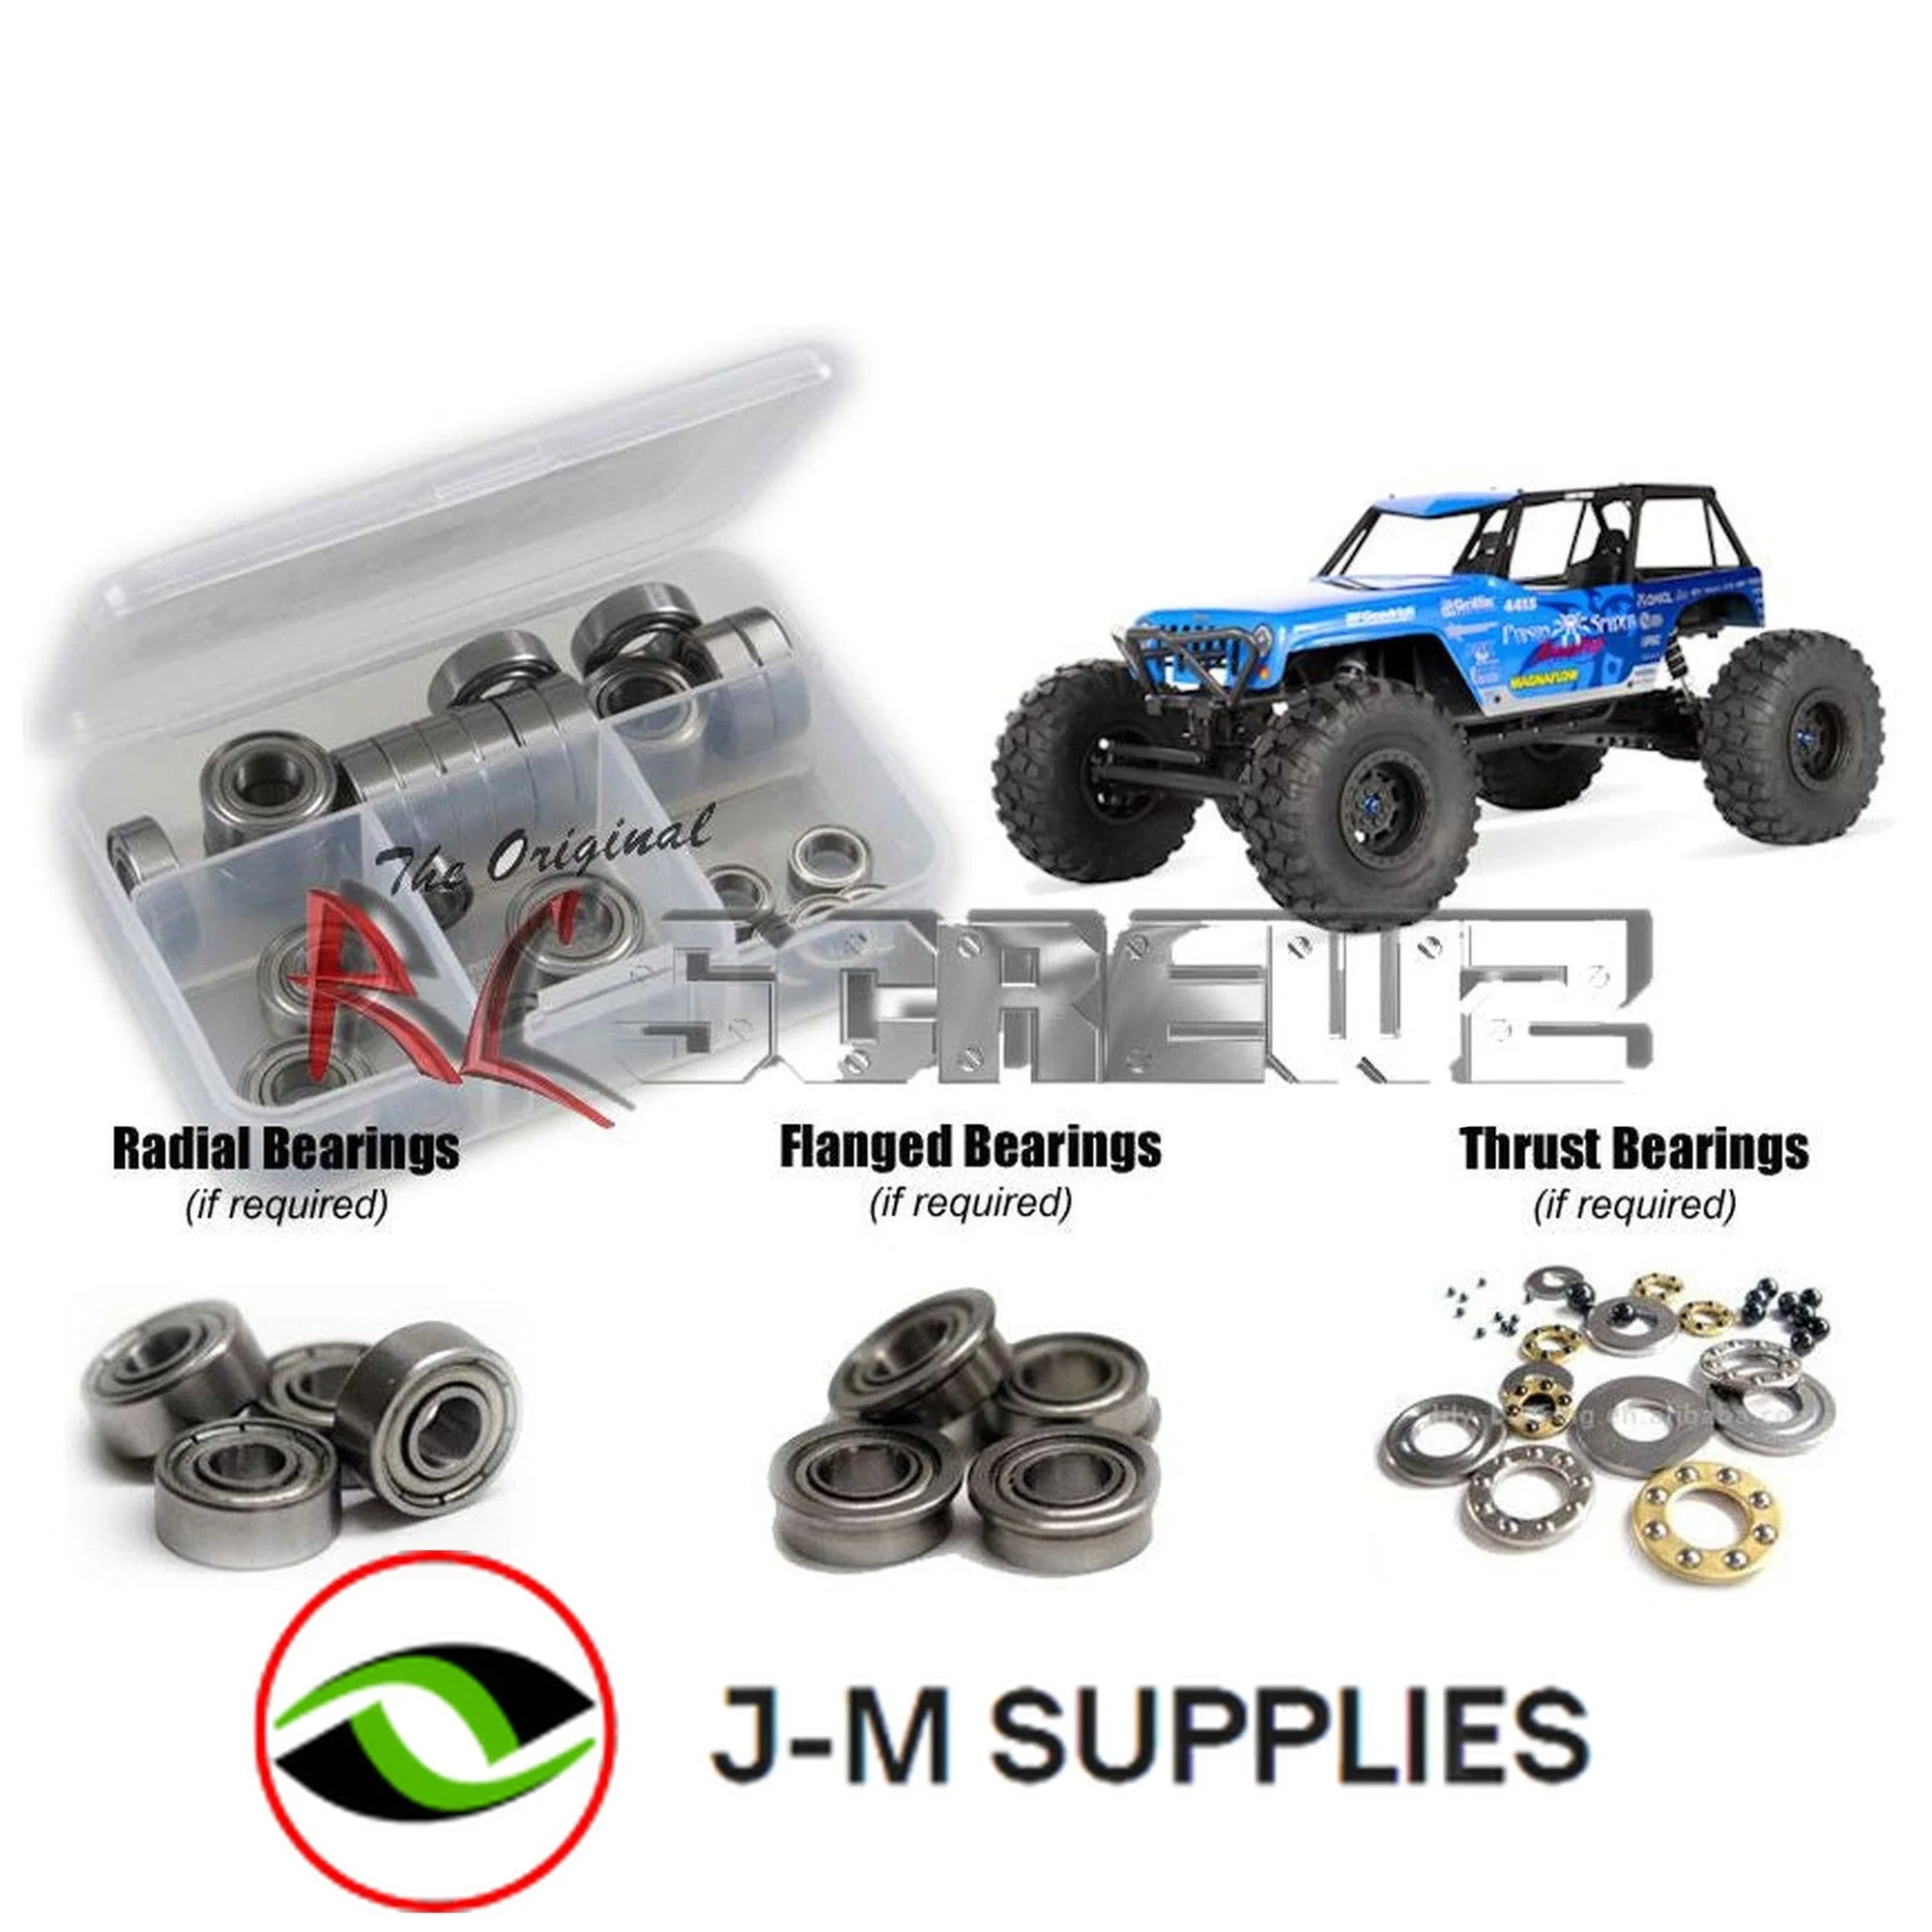 RCScrewZ Metal Shielded Bearing Kit axi007b for Axial Wraith Poison Spyder 90031 - Picture 1 of 12